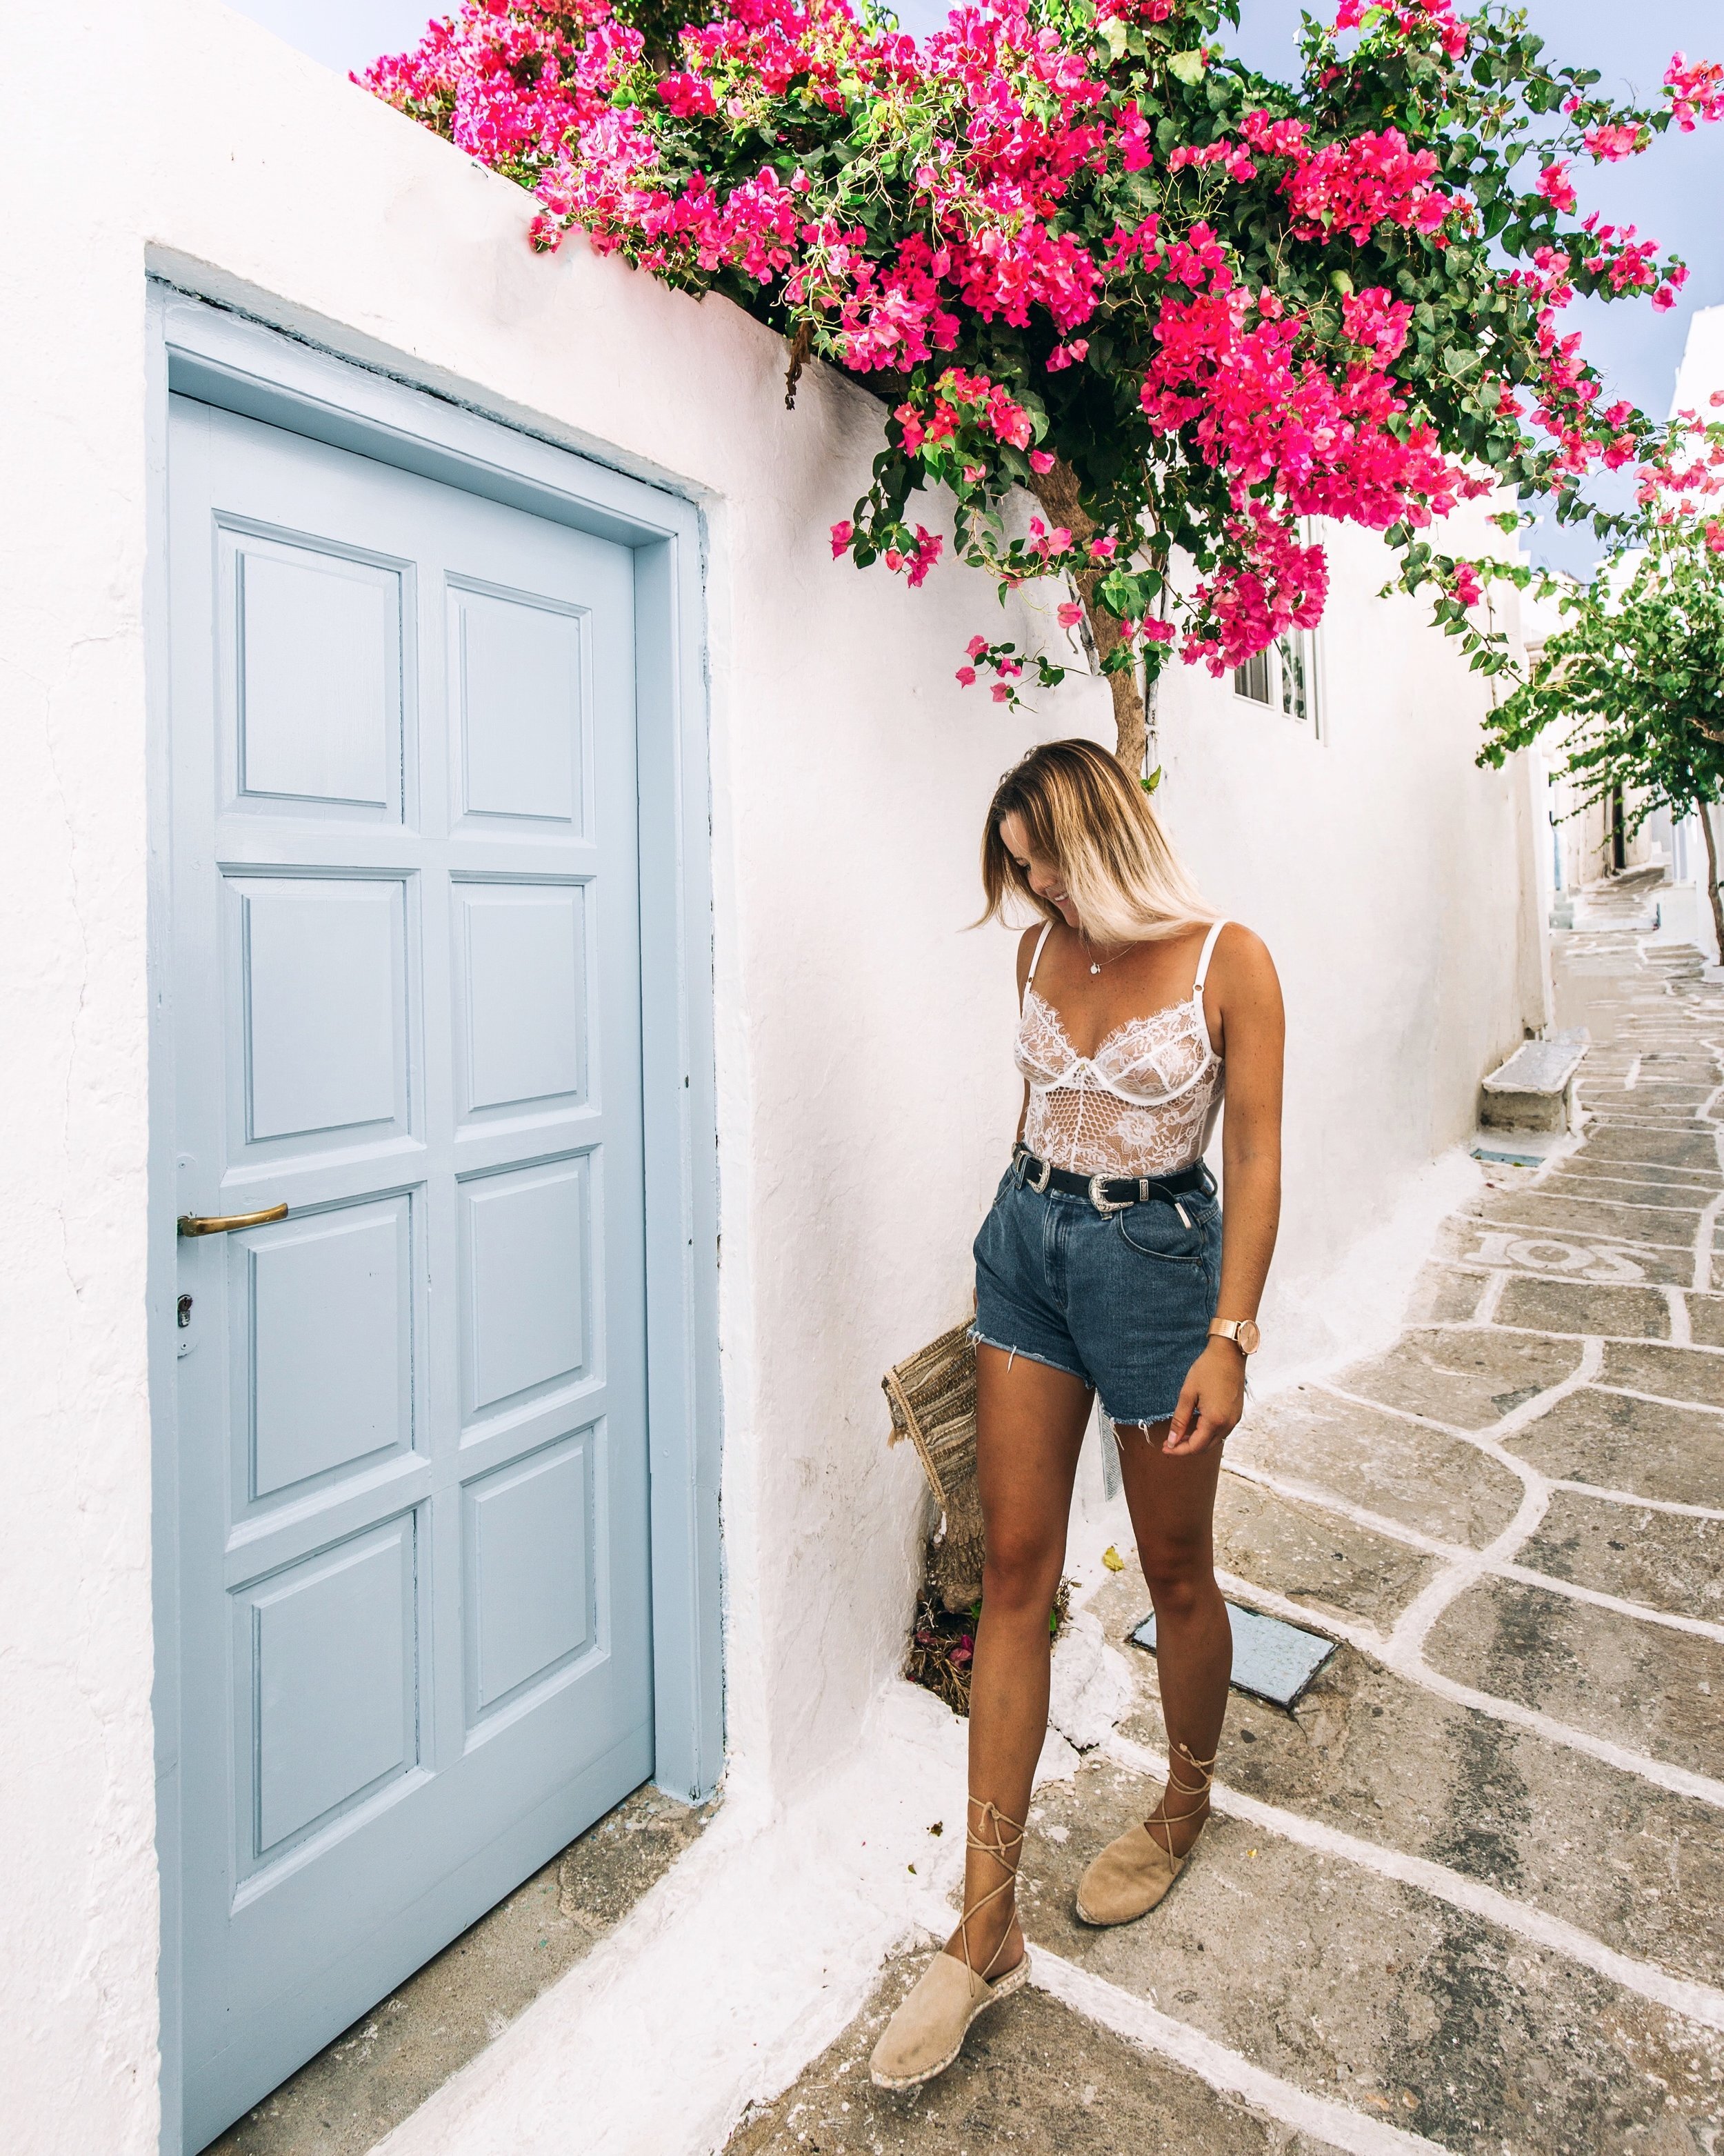  After spending summer in Greece living on Ios, this Ios Greece photography guide will inspire you to book your own trip. Get tips on where to eat in Ios and the best photo spots in Ios Greece. | ios greece photography | ios greece things to do in | 